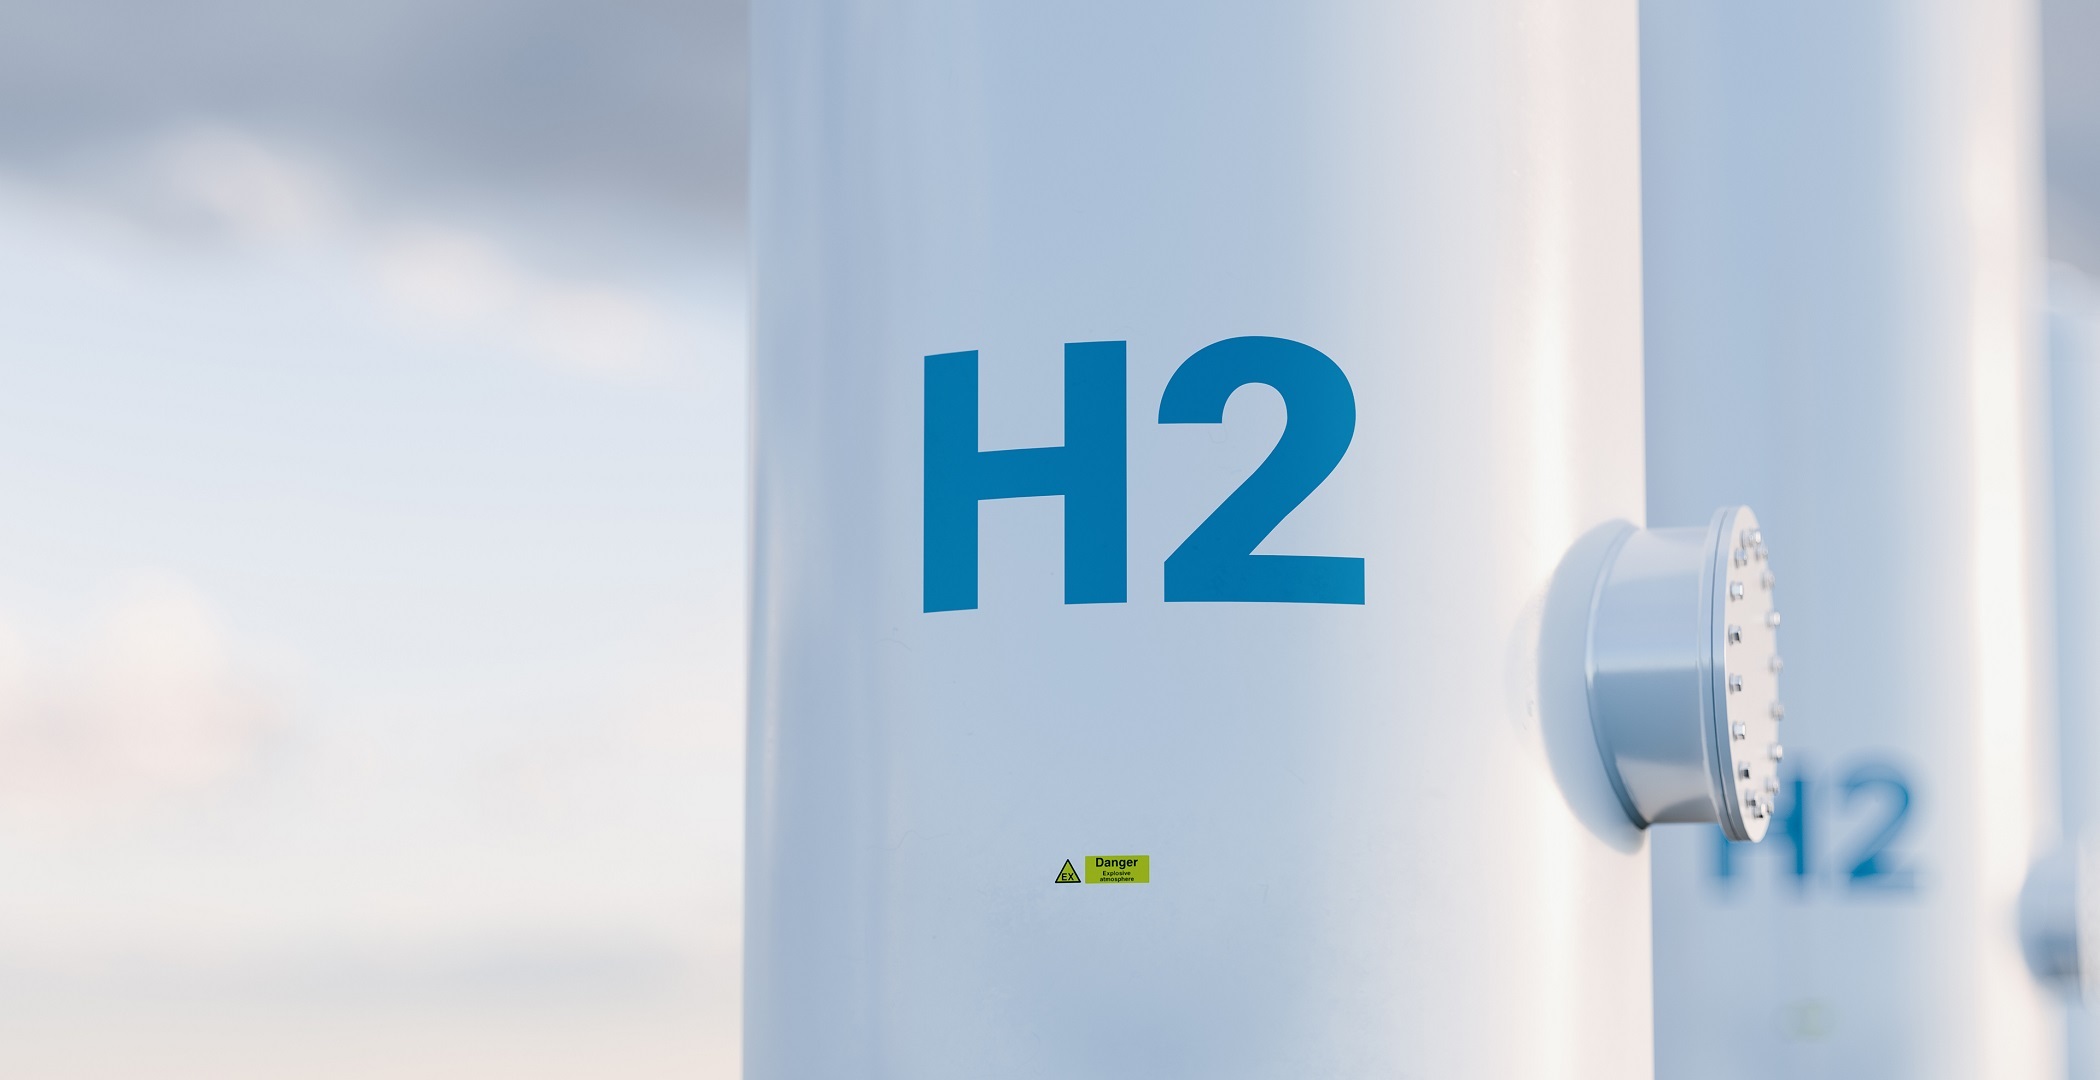 S&P Global Platts Launches First Carbon Neutral Hydrogen Assessments